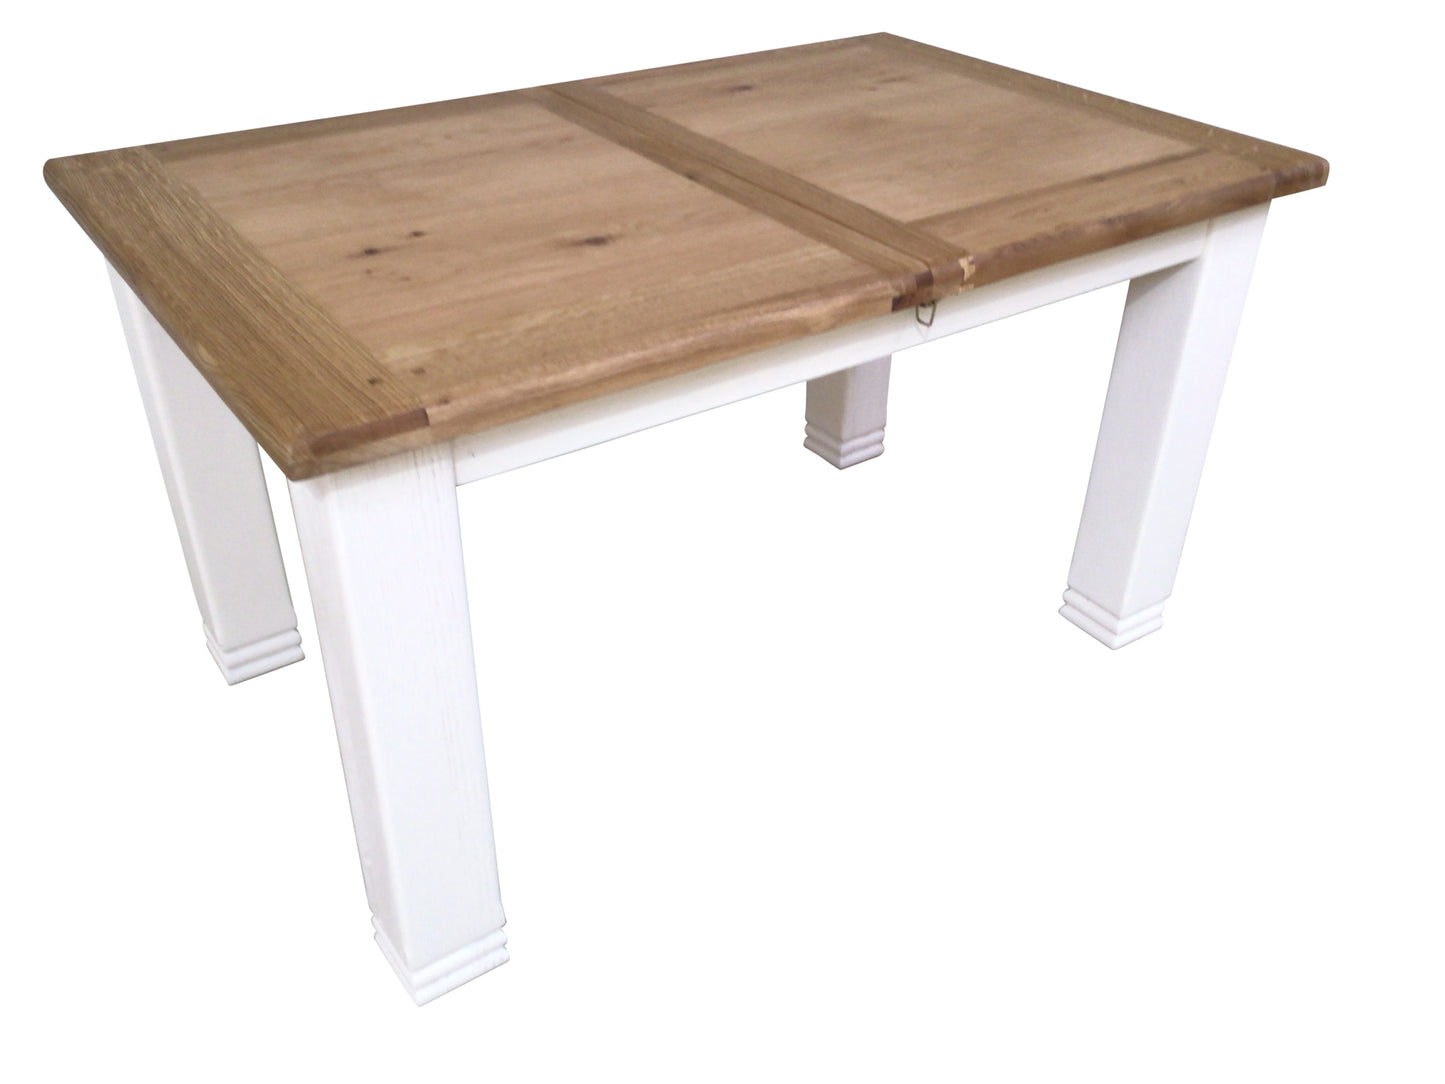 Danube 1.4m Oak extension table painted Off-White